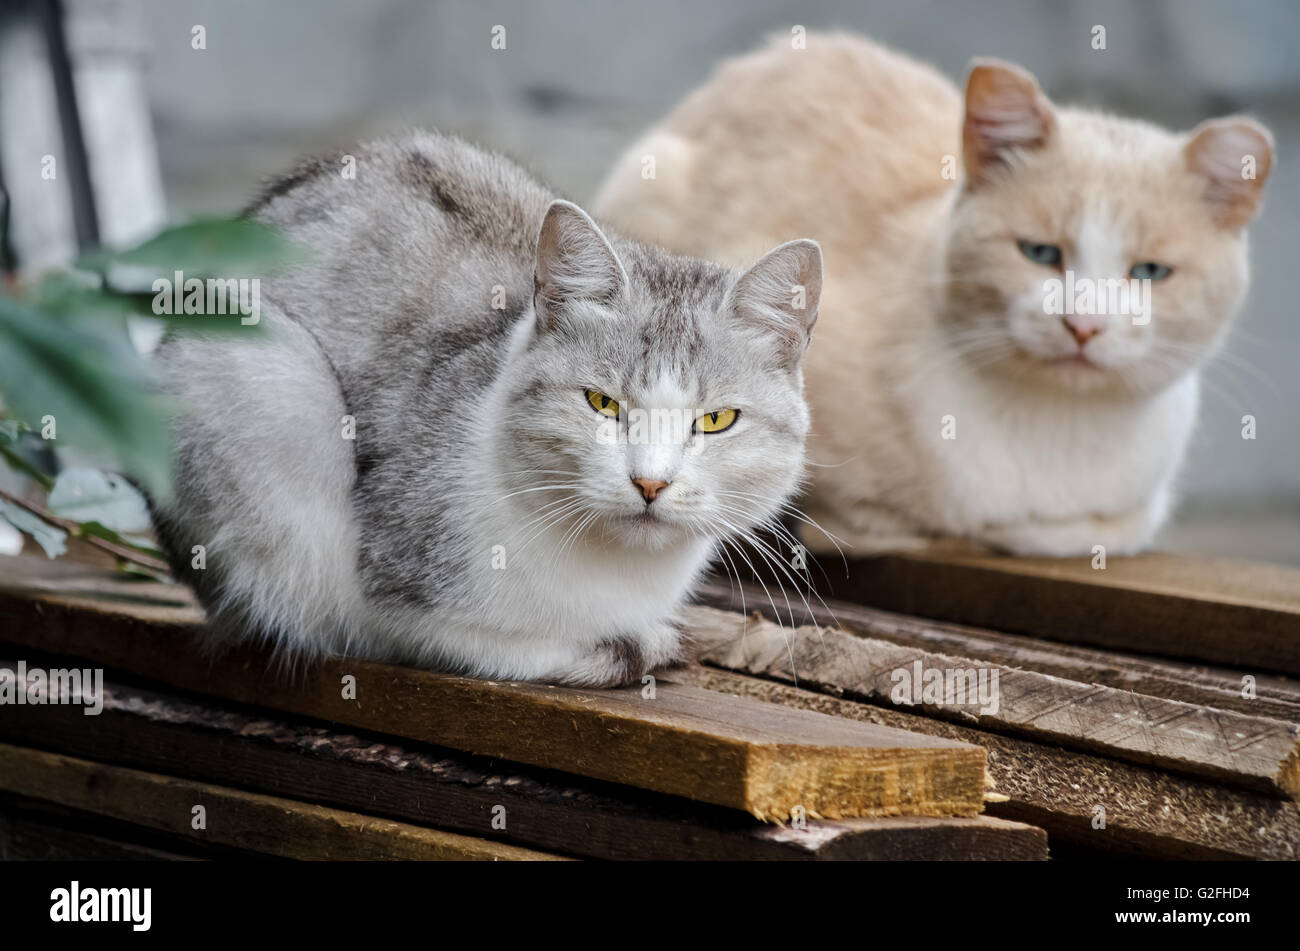 Cats sit on boards Stock Photo